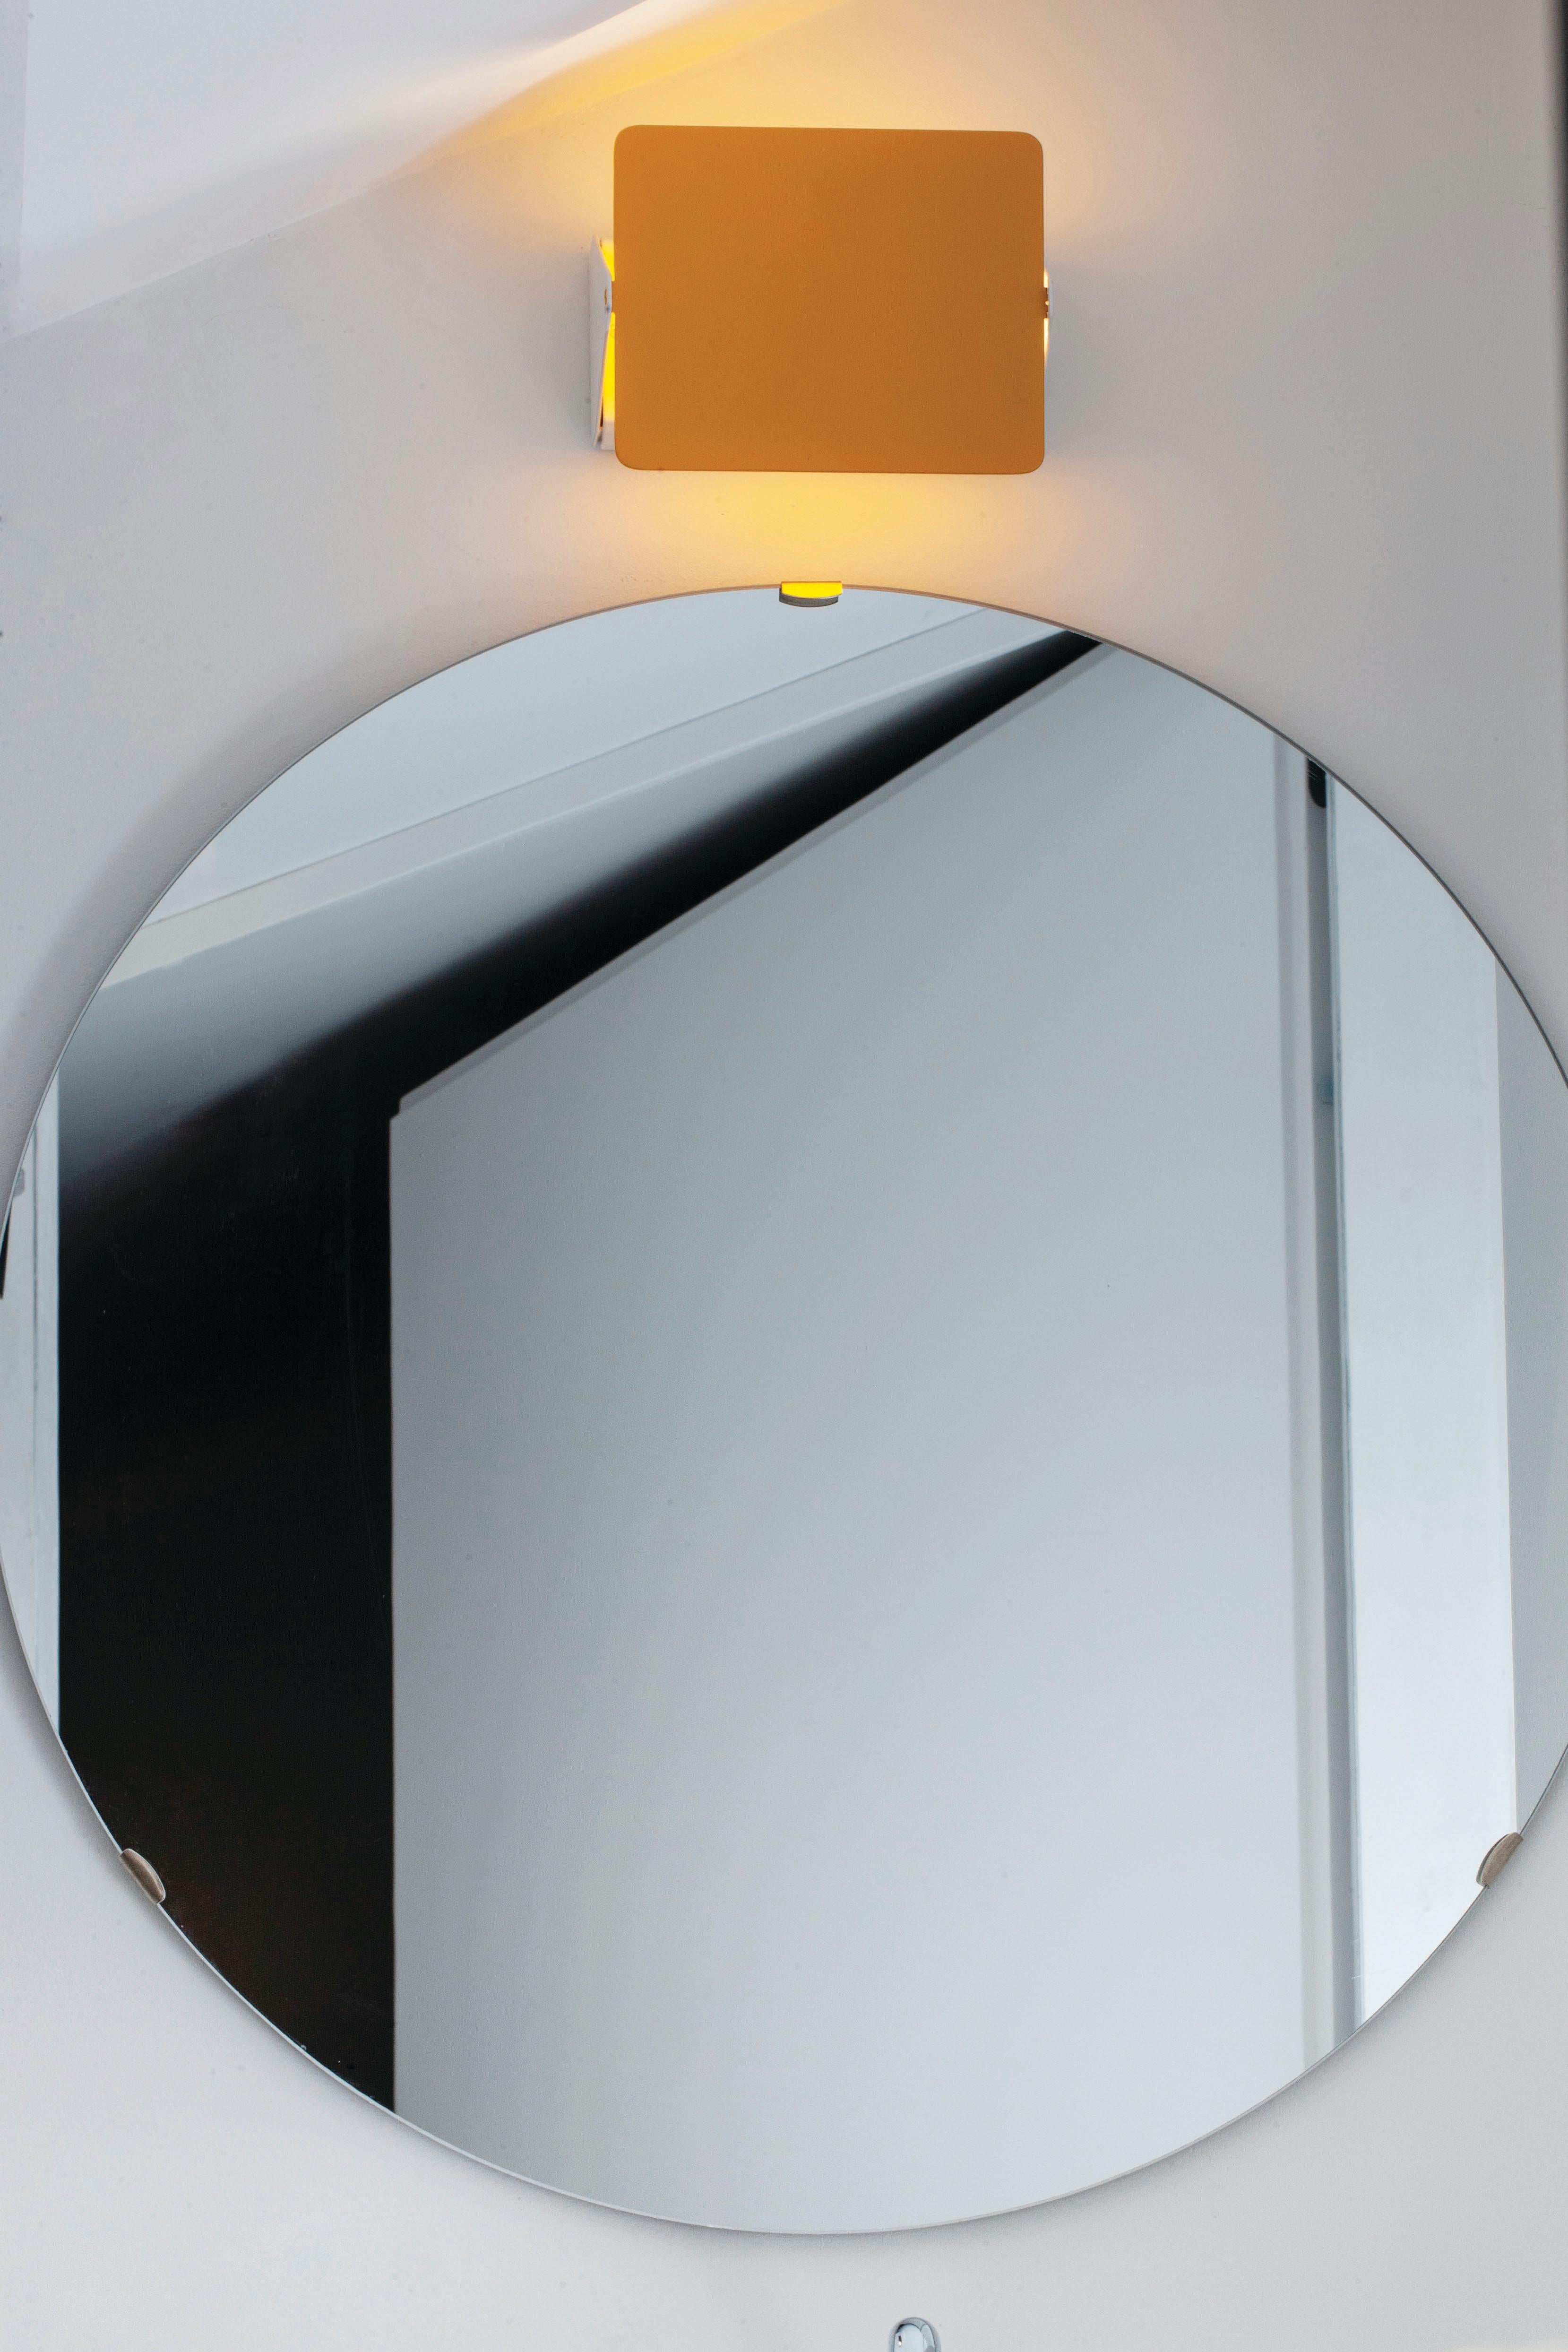 Charlotte Perriand 'Applique à Volet Pivotant' wall light in yellow for Nemo. 

Originally designed in the 1950s as the iconic CP1, these newly produced authorized re-editions are still made in France with the highest level of integrity and